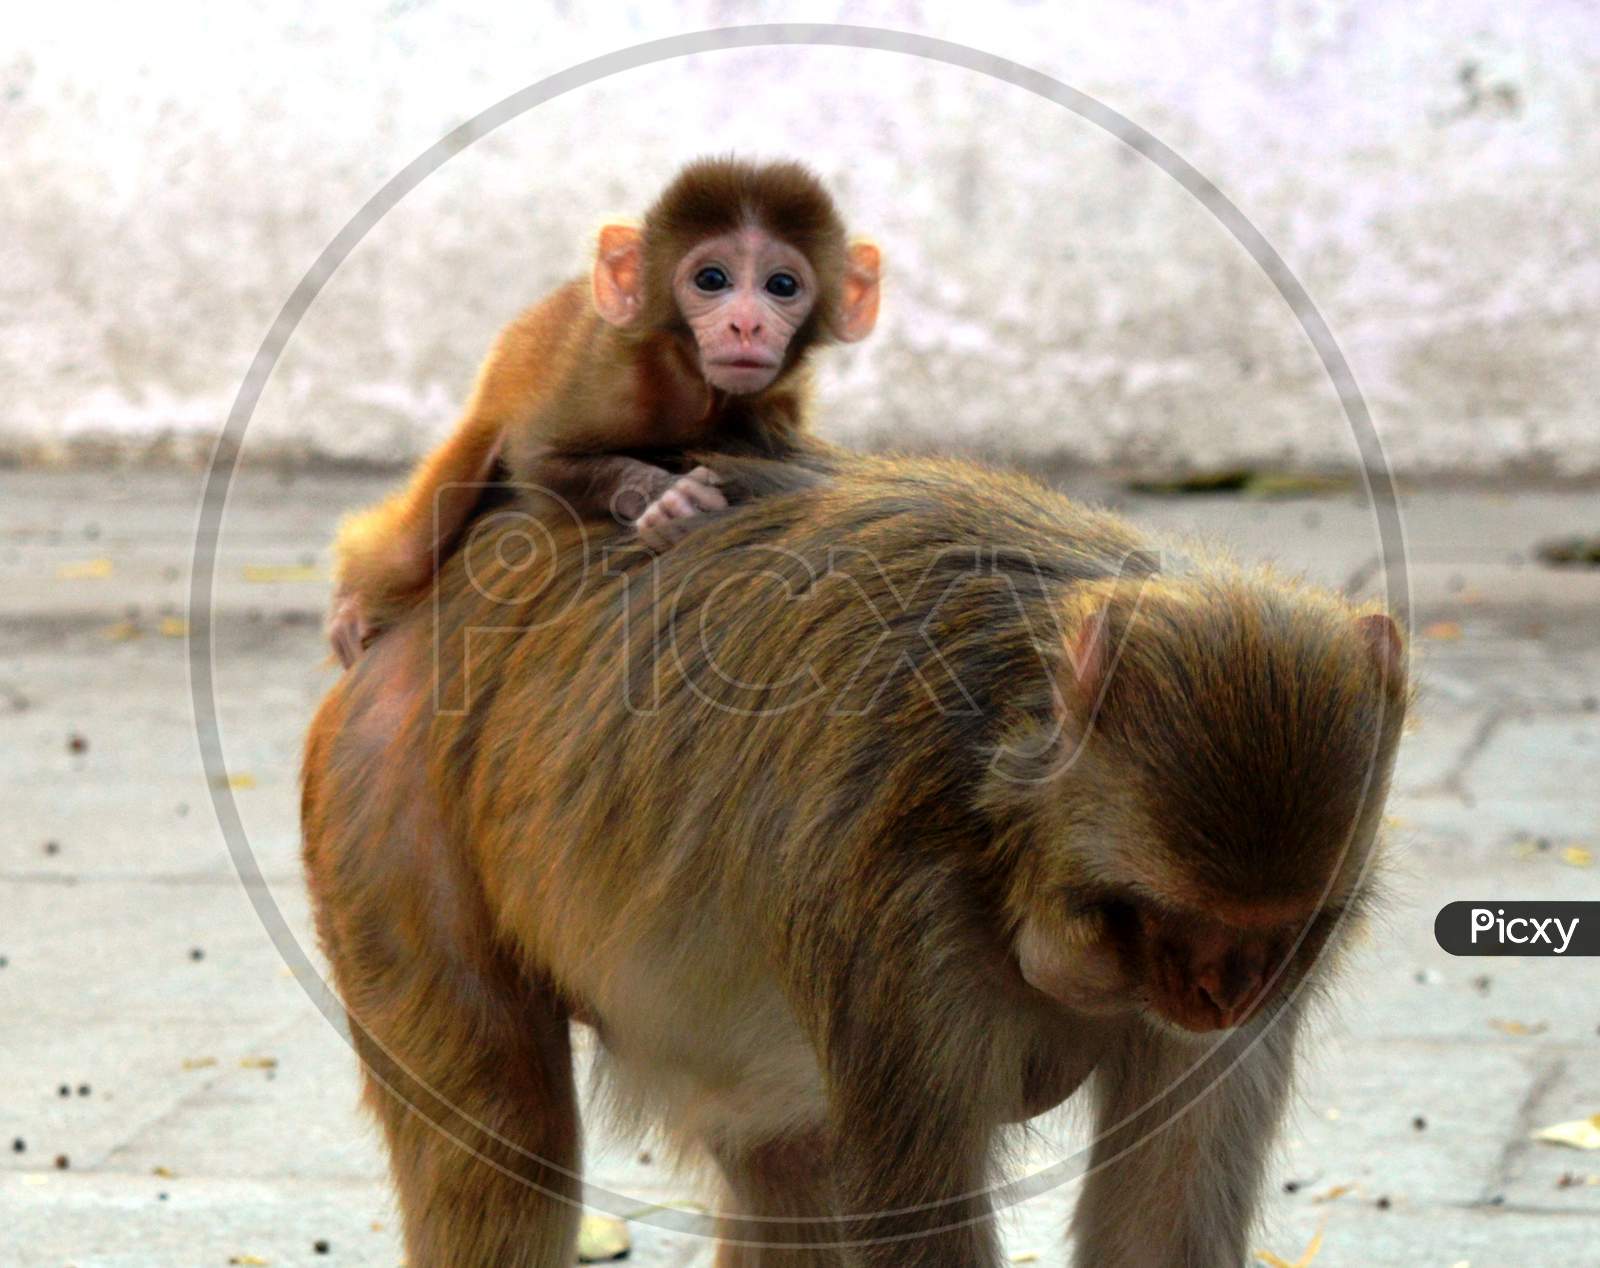 Monkey baby and mother